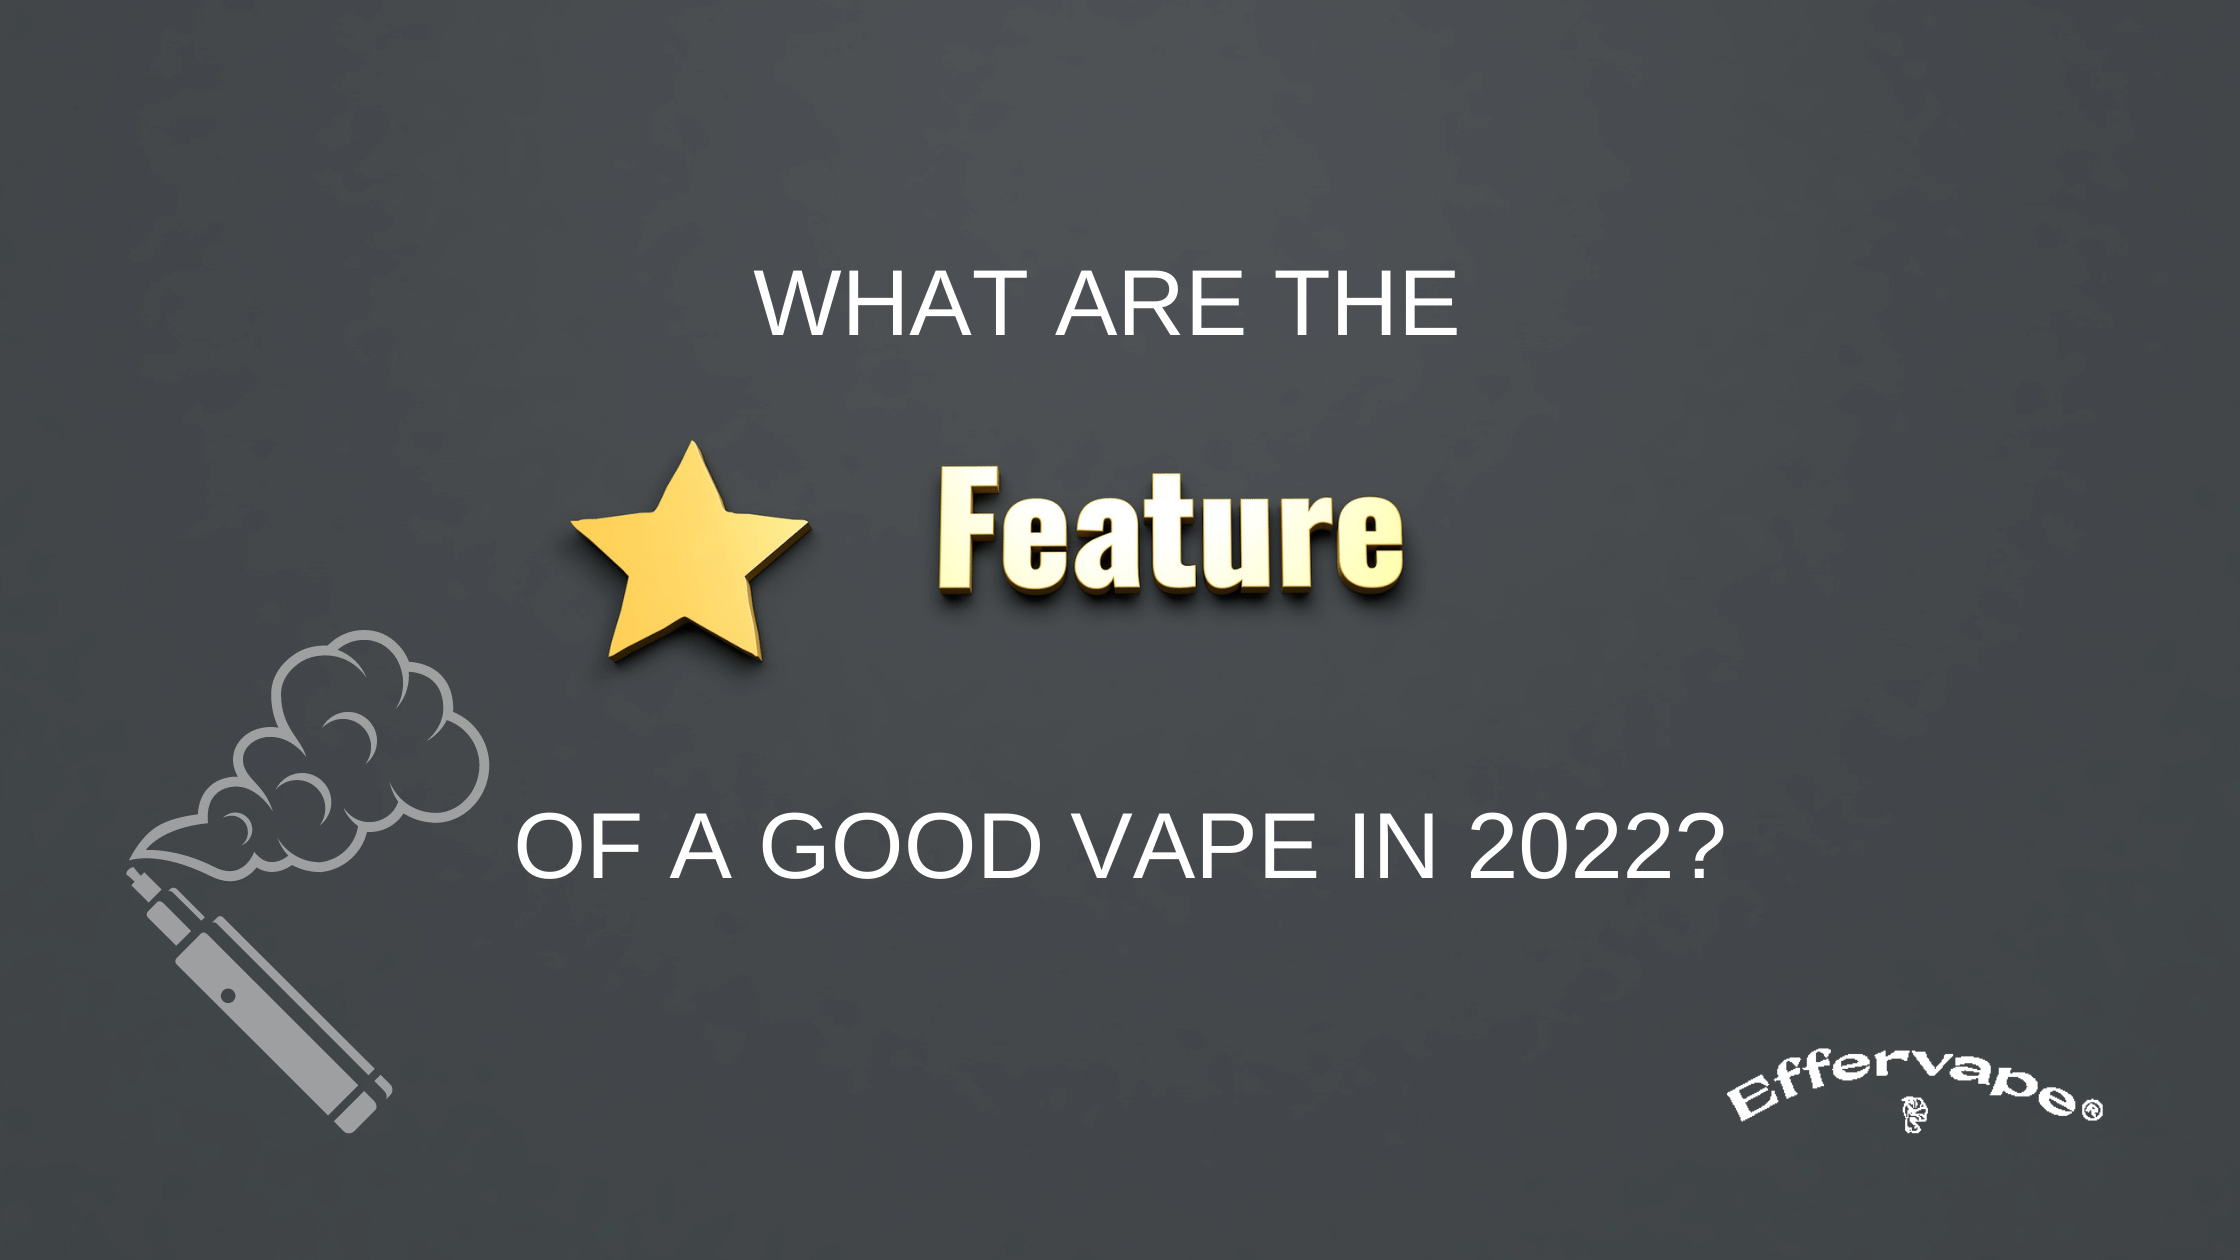 What Are The Features Of A Good Vape in 2022?